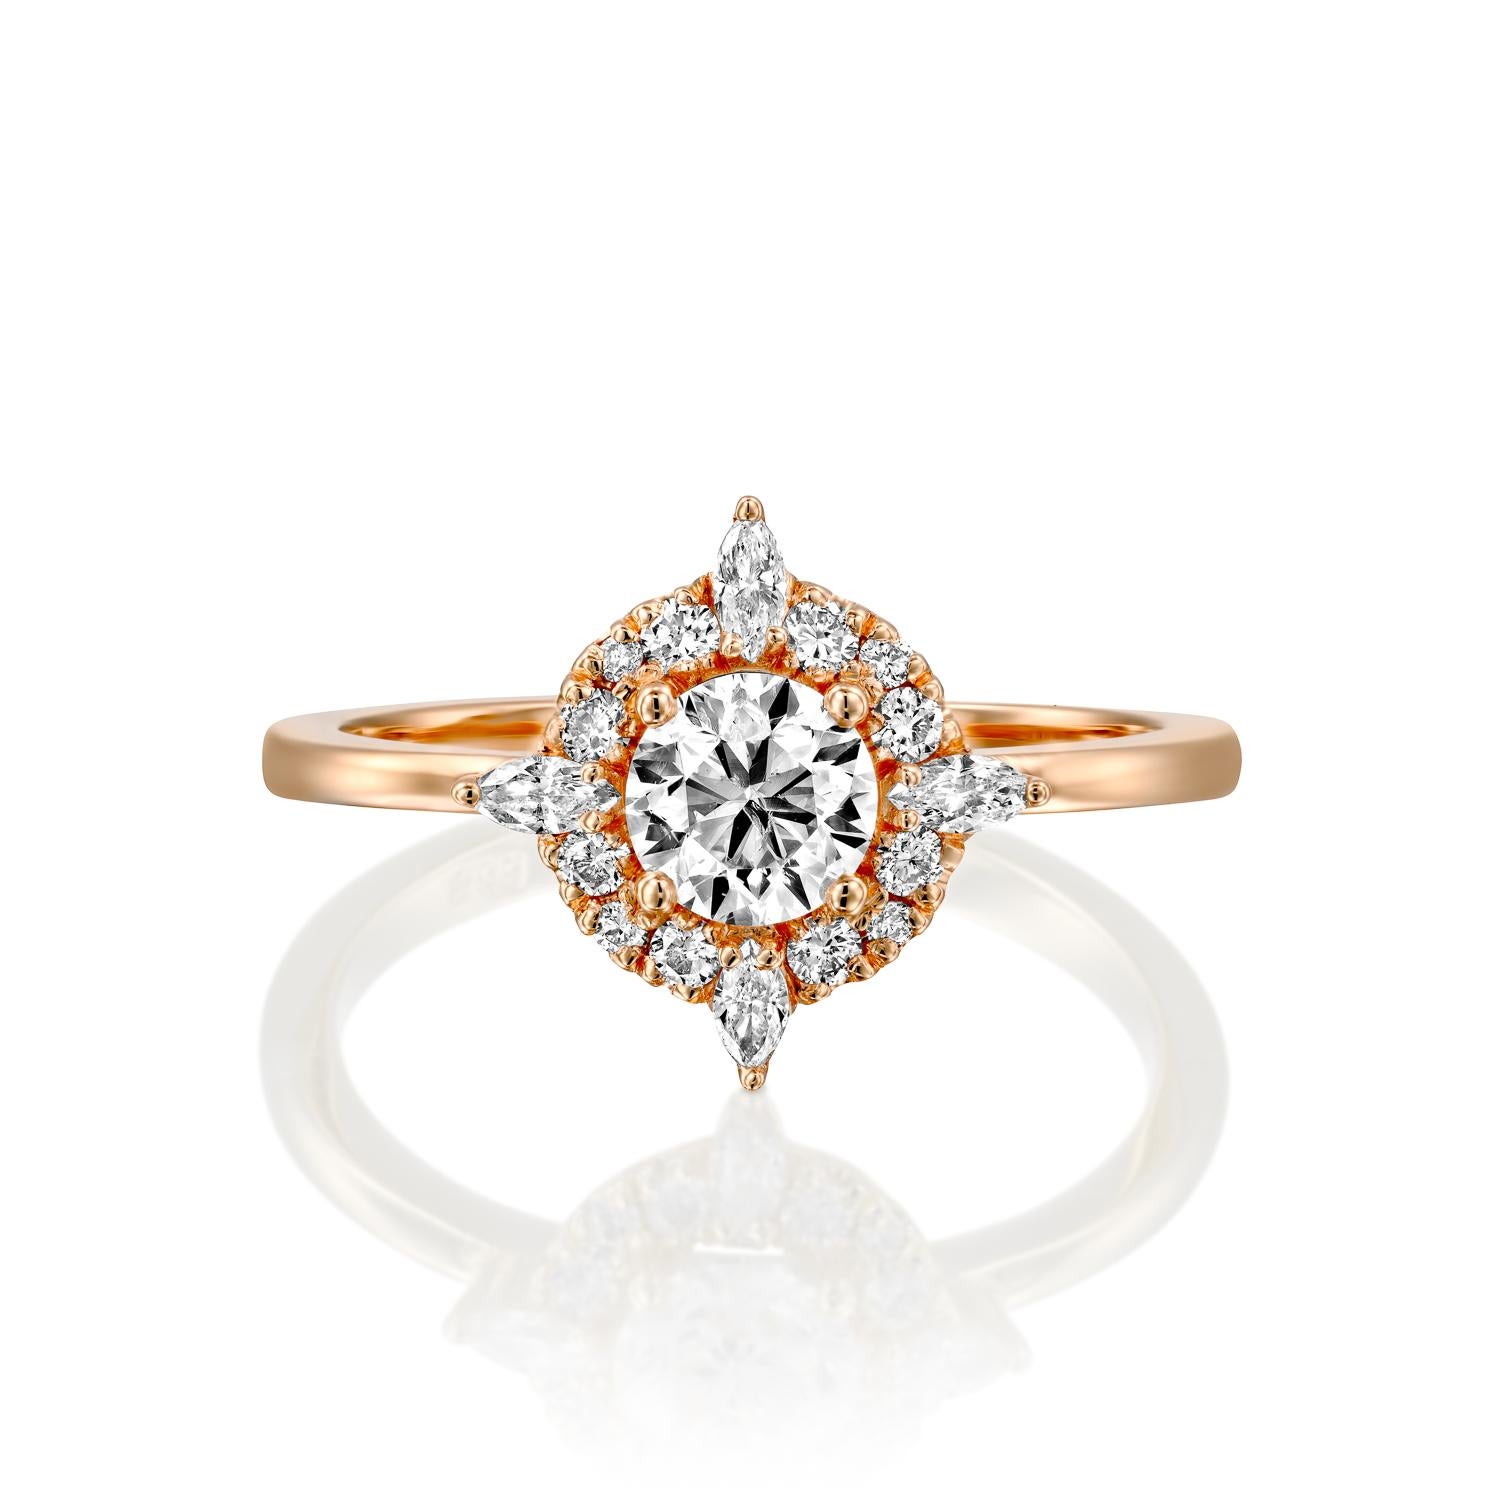 Unique and special Victorian style GIA certified diamond engagement ring. Ring features a 1 carat round cut 100% eye clean natural diamond of F-G color and VS2-SI1 clarity and it is surrounded by smaller natural round diamonds approx. 0.25 total